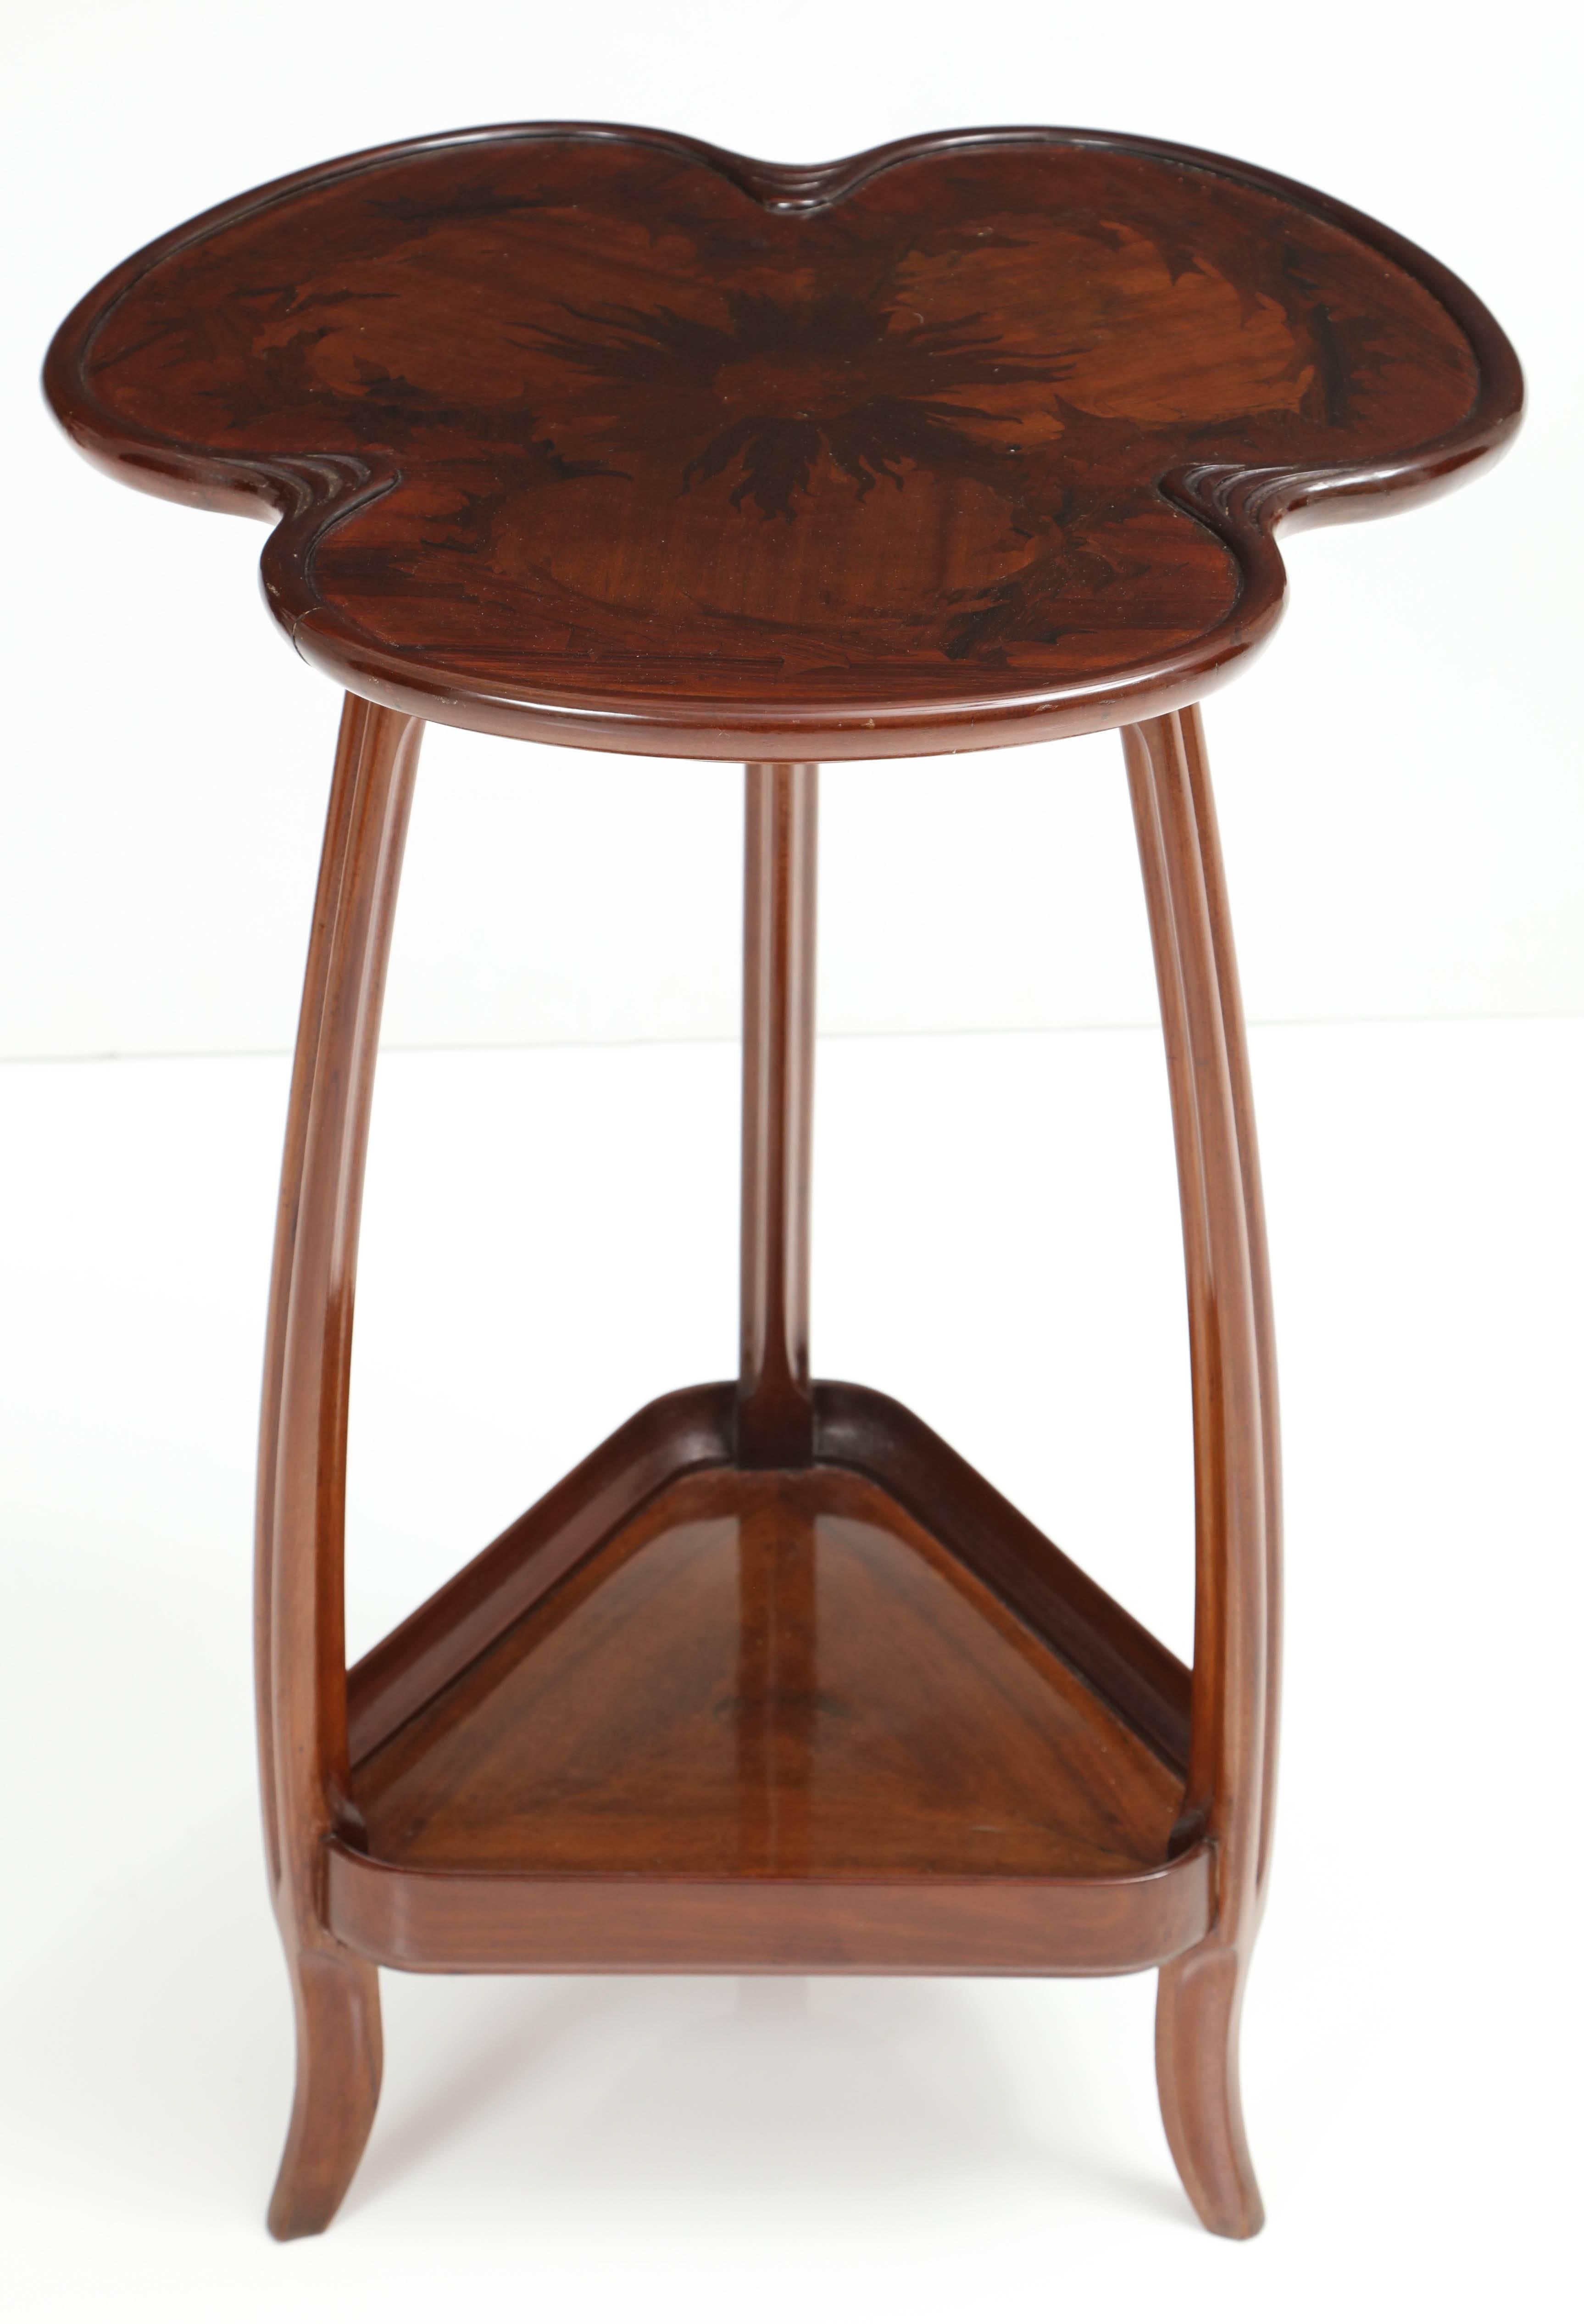 French Rosewood and Mahogany Art Nouveau Gueridon Table by Majorelle